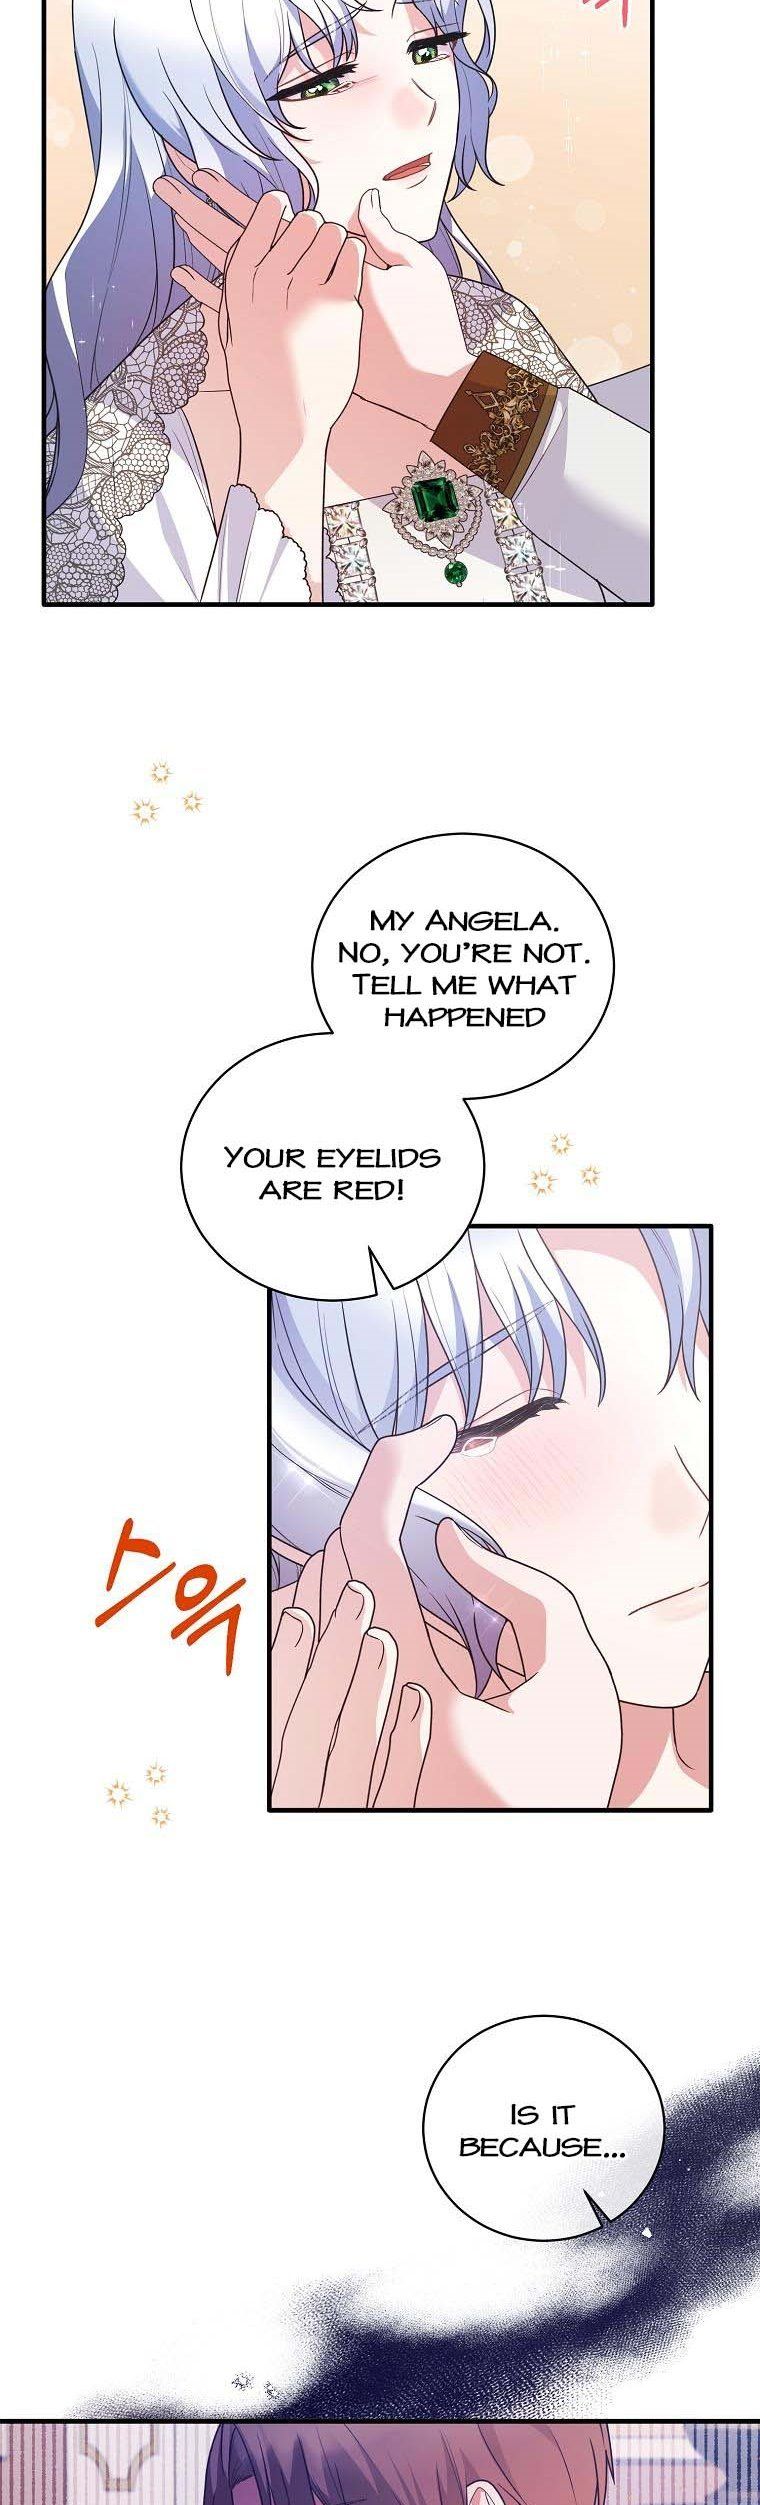 Angelic Lady Chapter 129 page 3